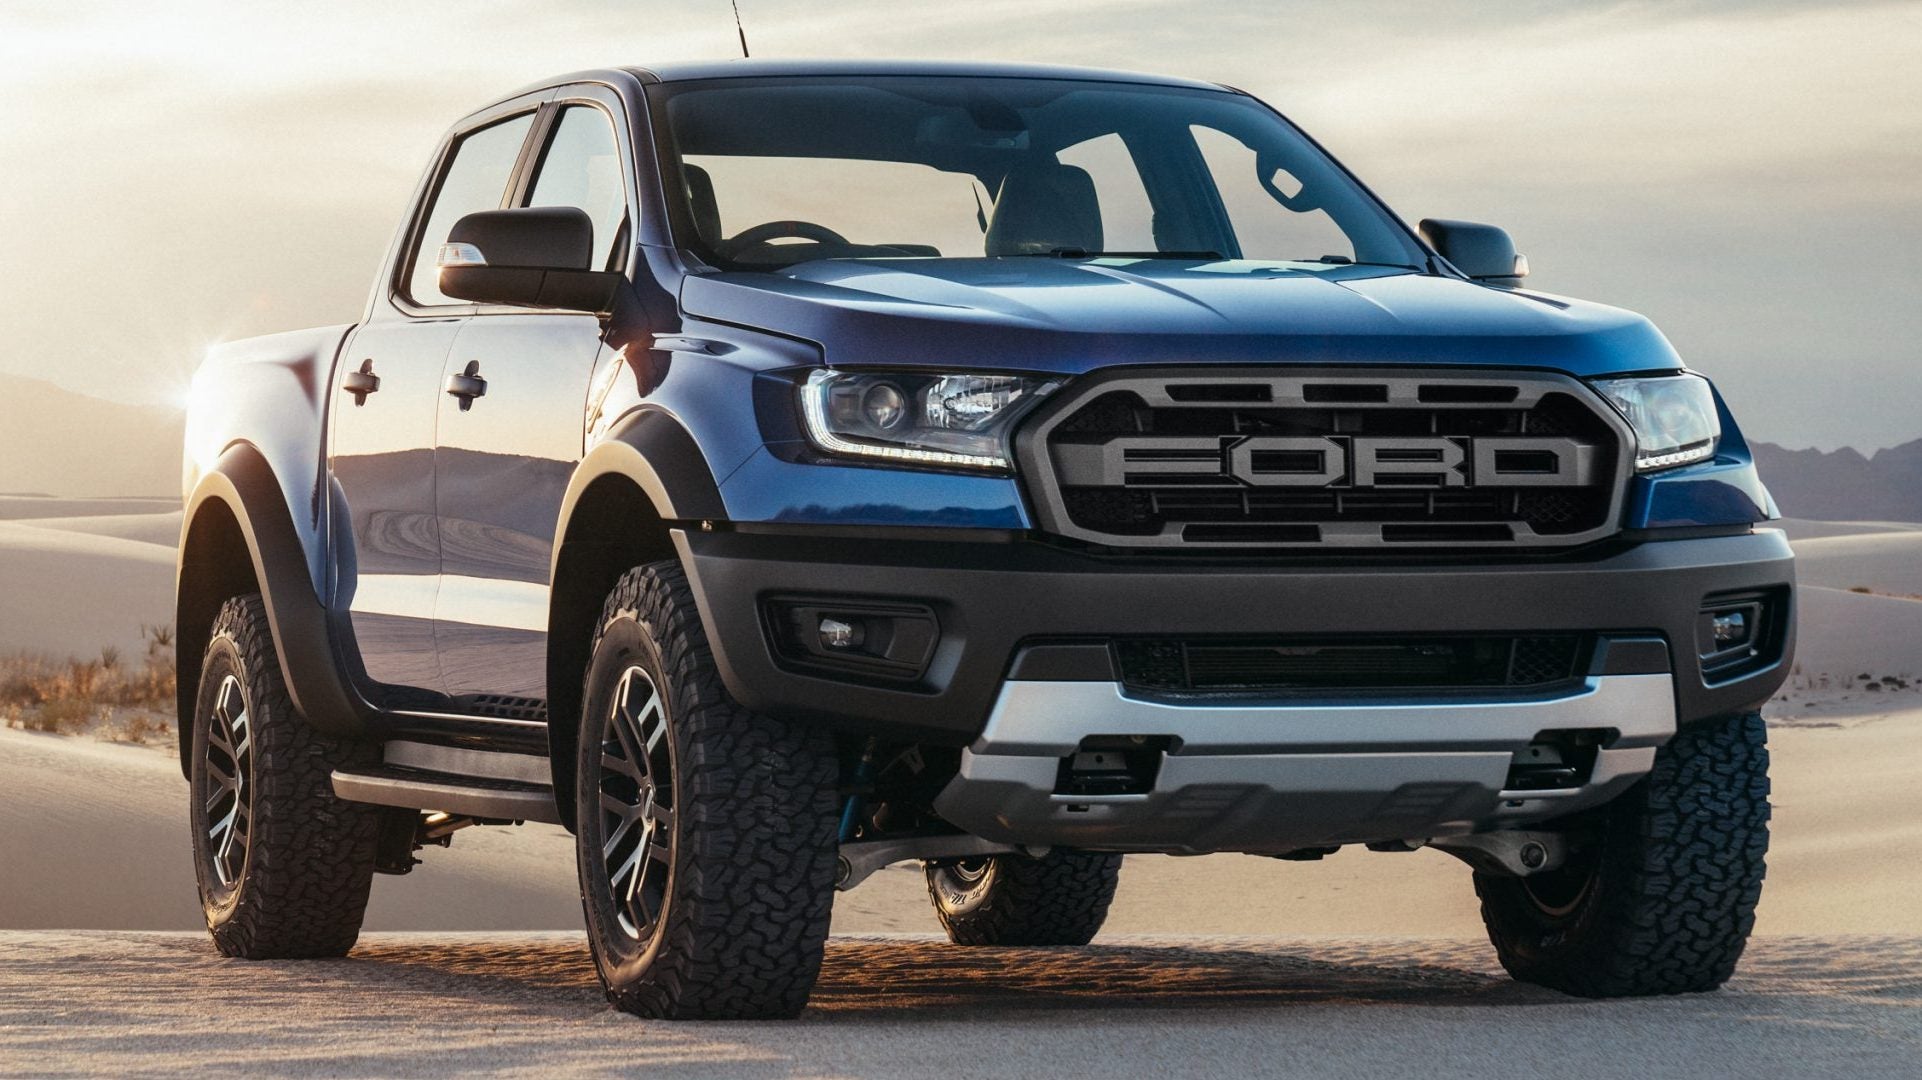 Confirmed: Ford Ranger Raptor Will Not Be Sold in the US